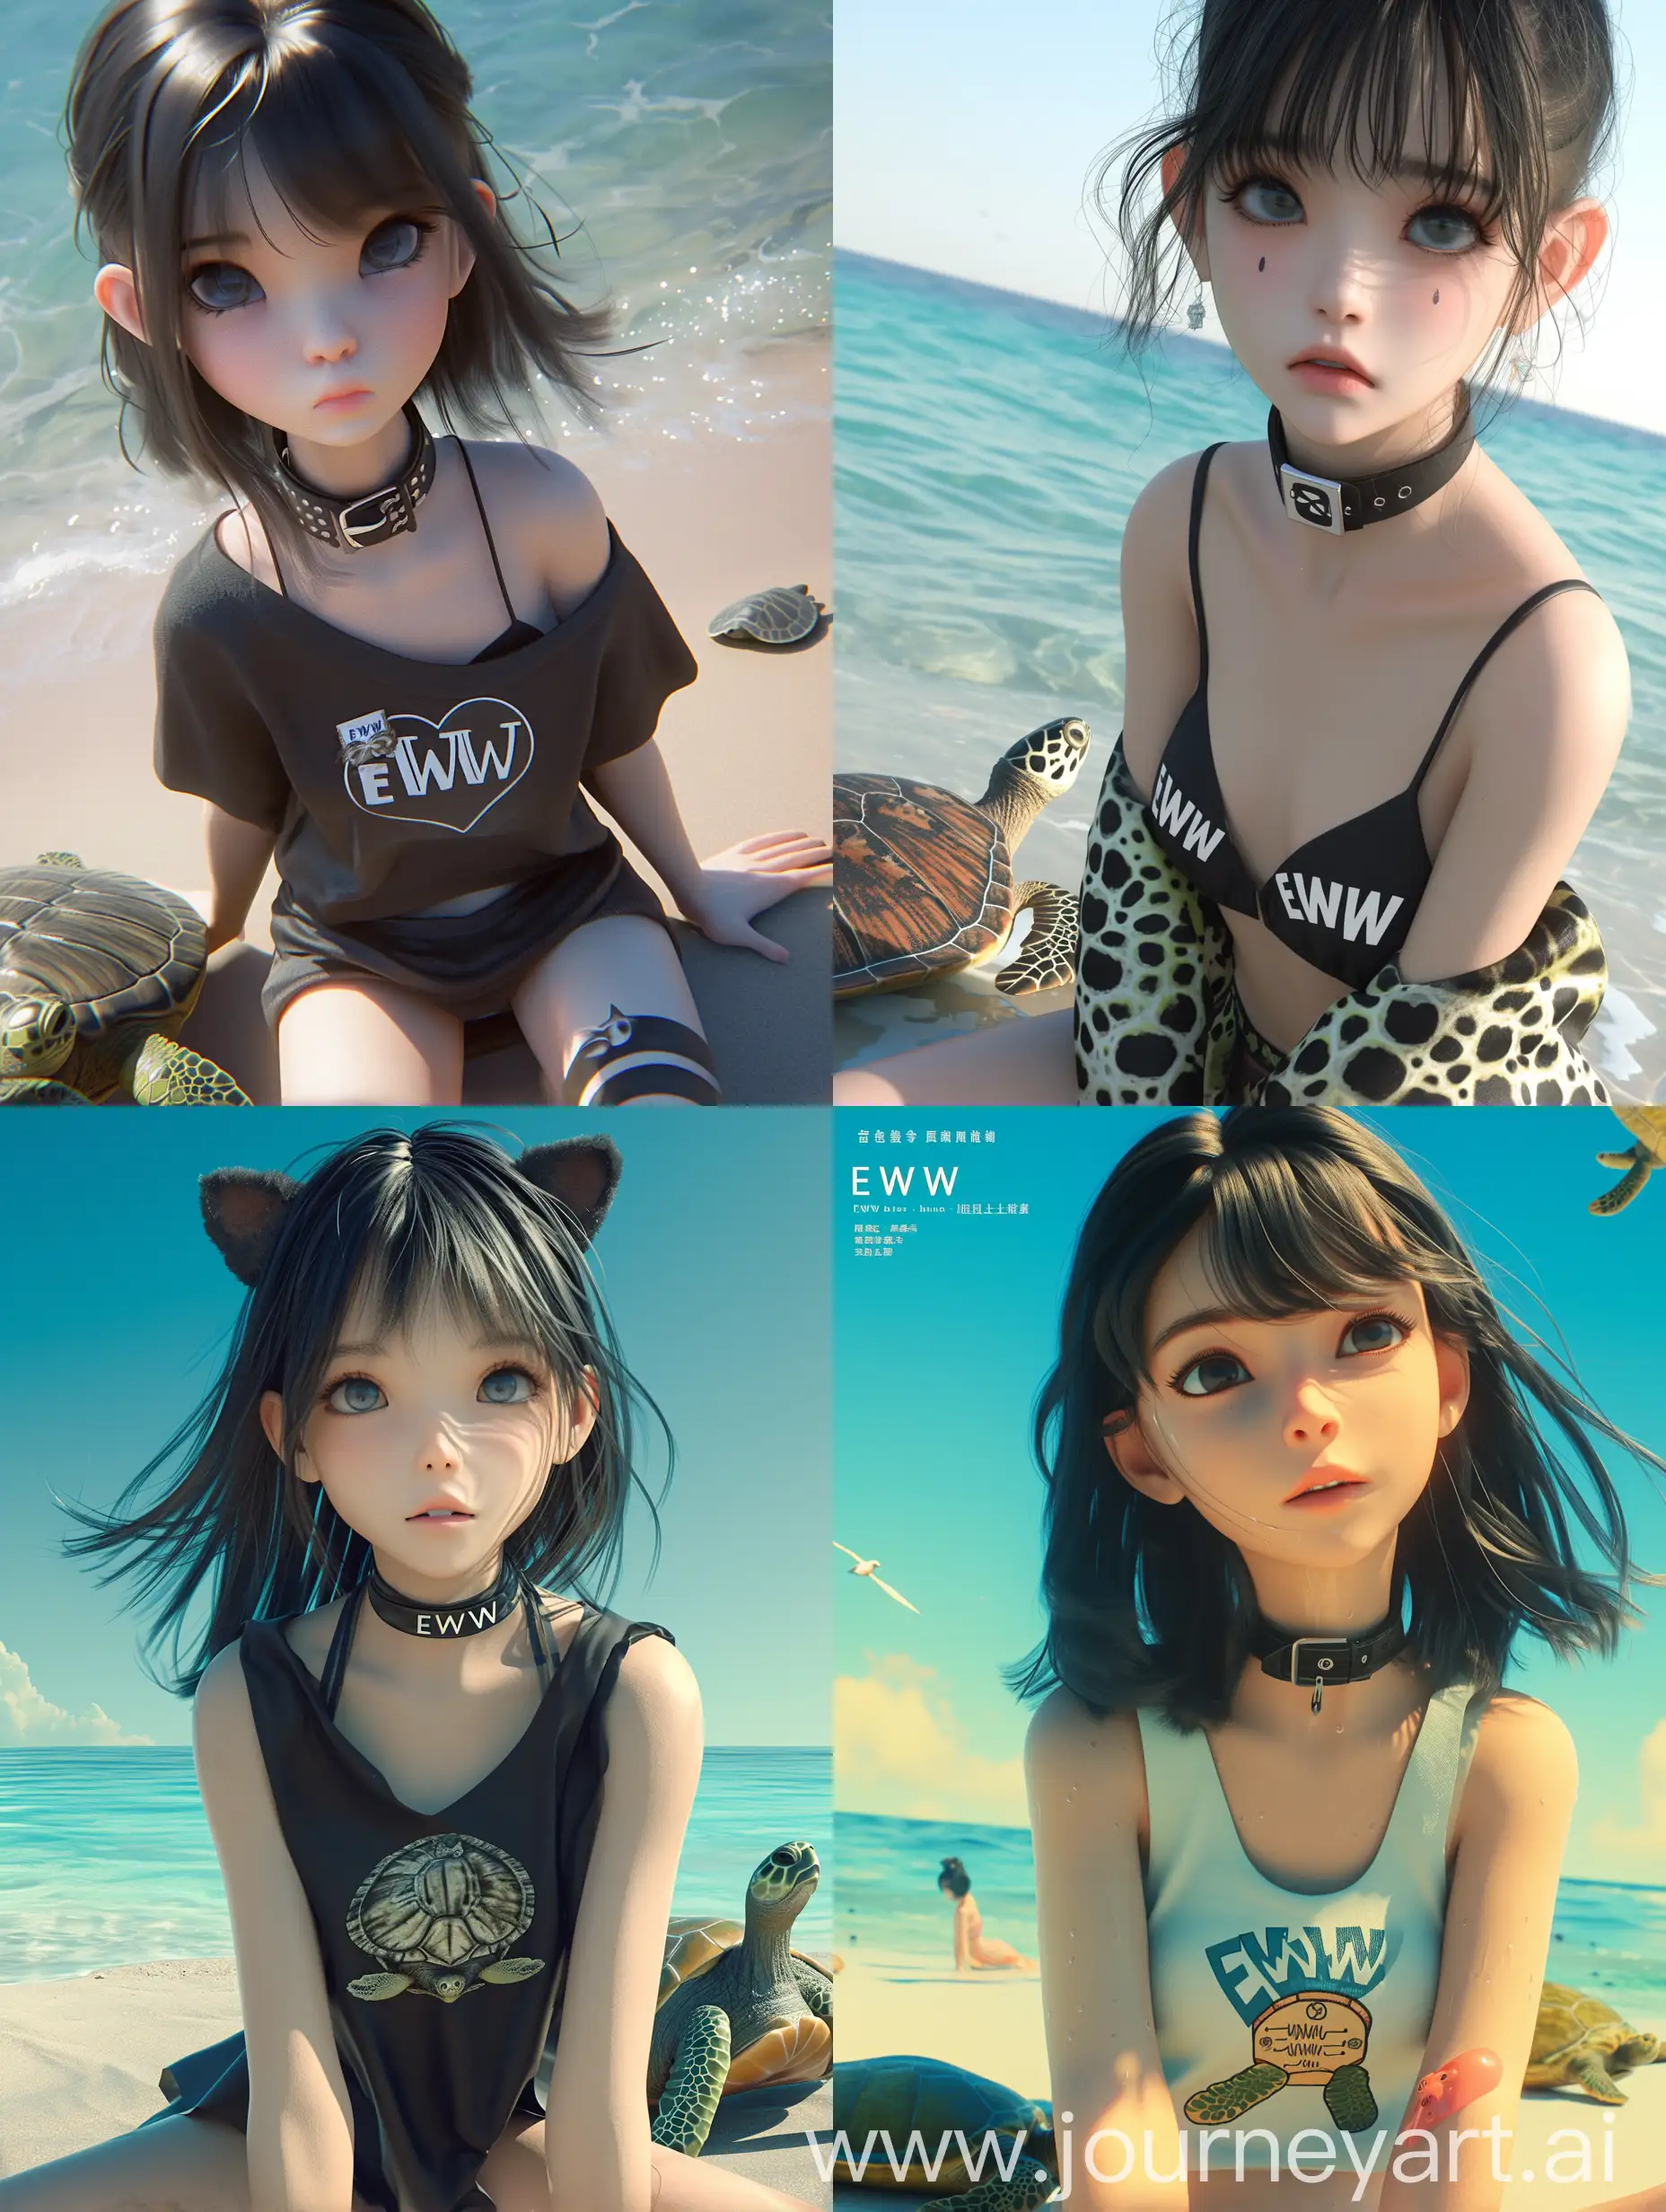 Adorable-Anime-Girl-with-Turtle-on-Beach-Surreal-UltraRealistic-3D-Animation